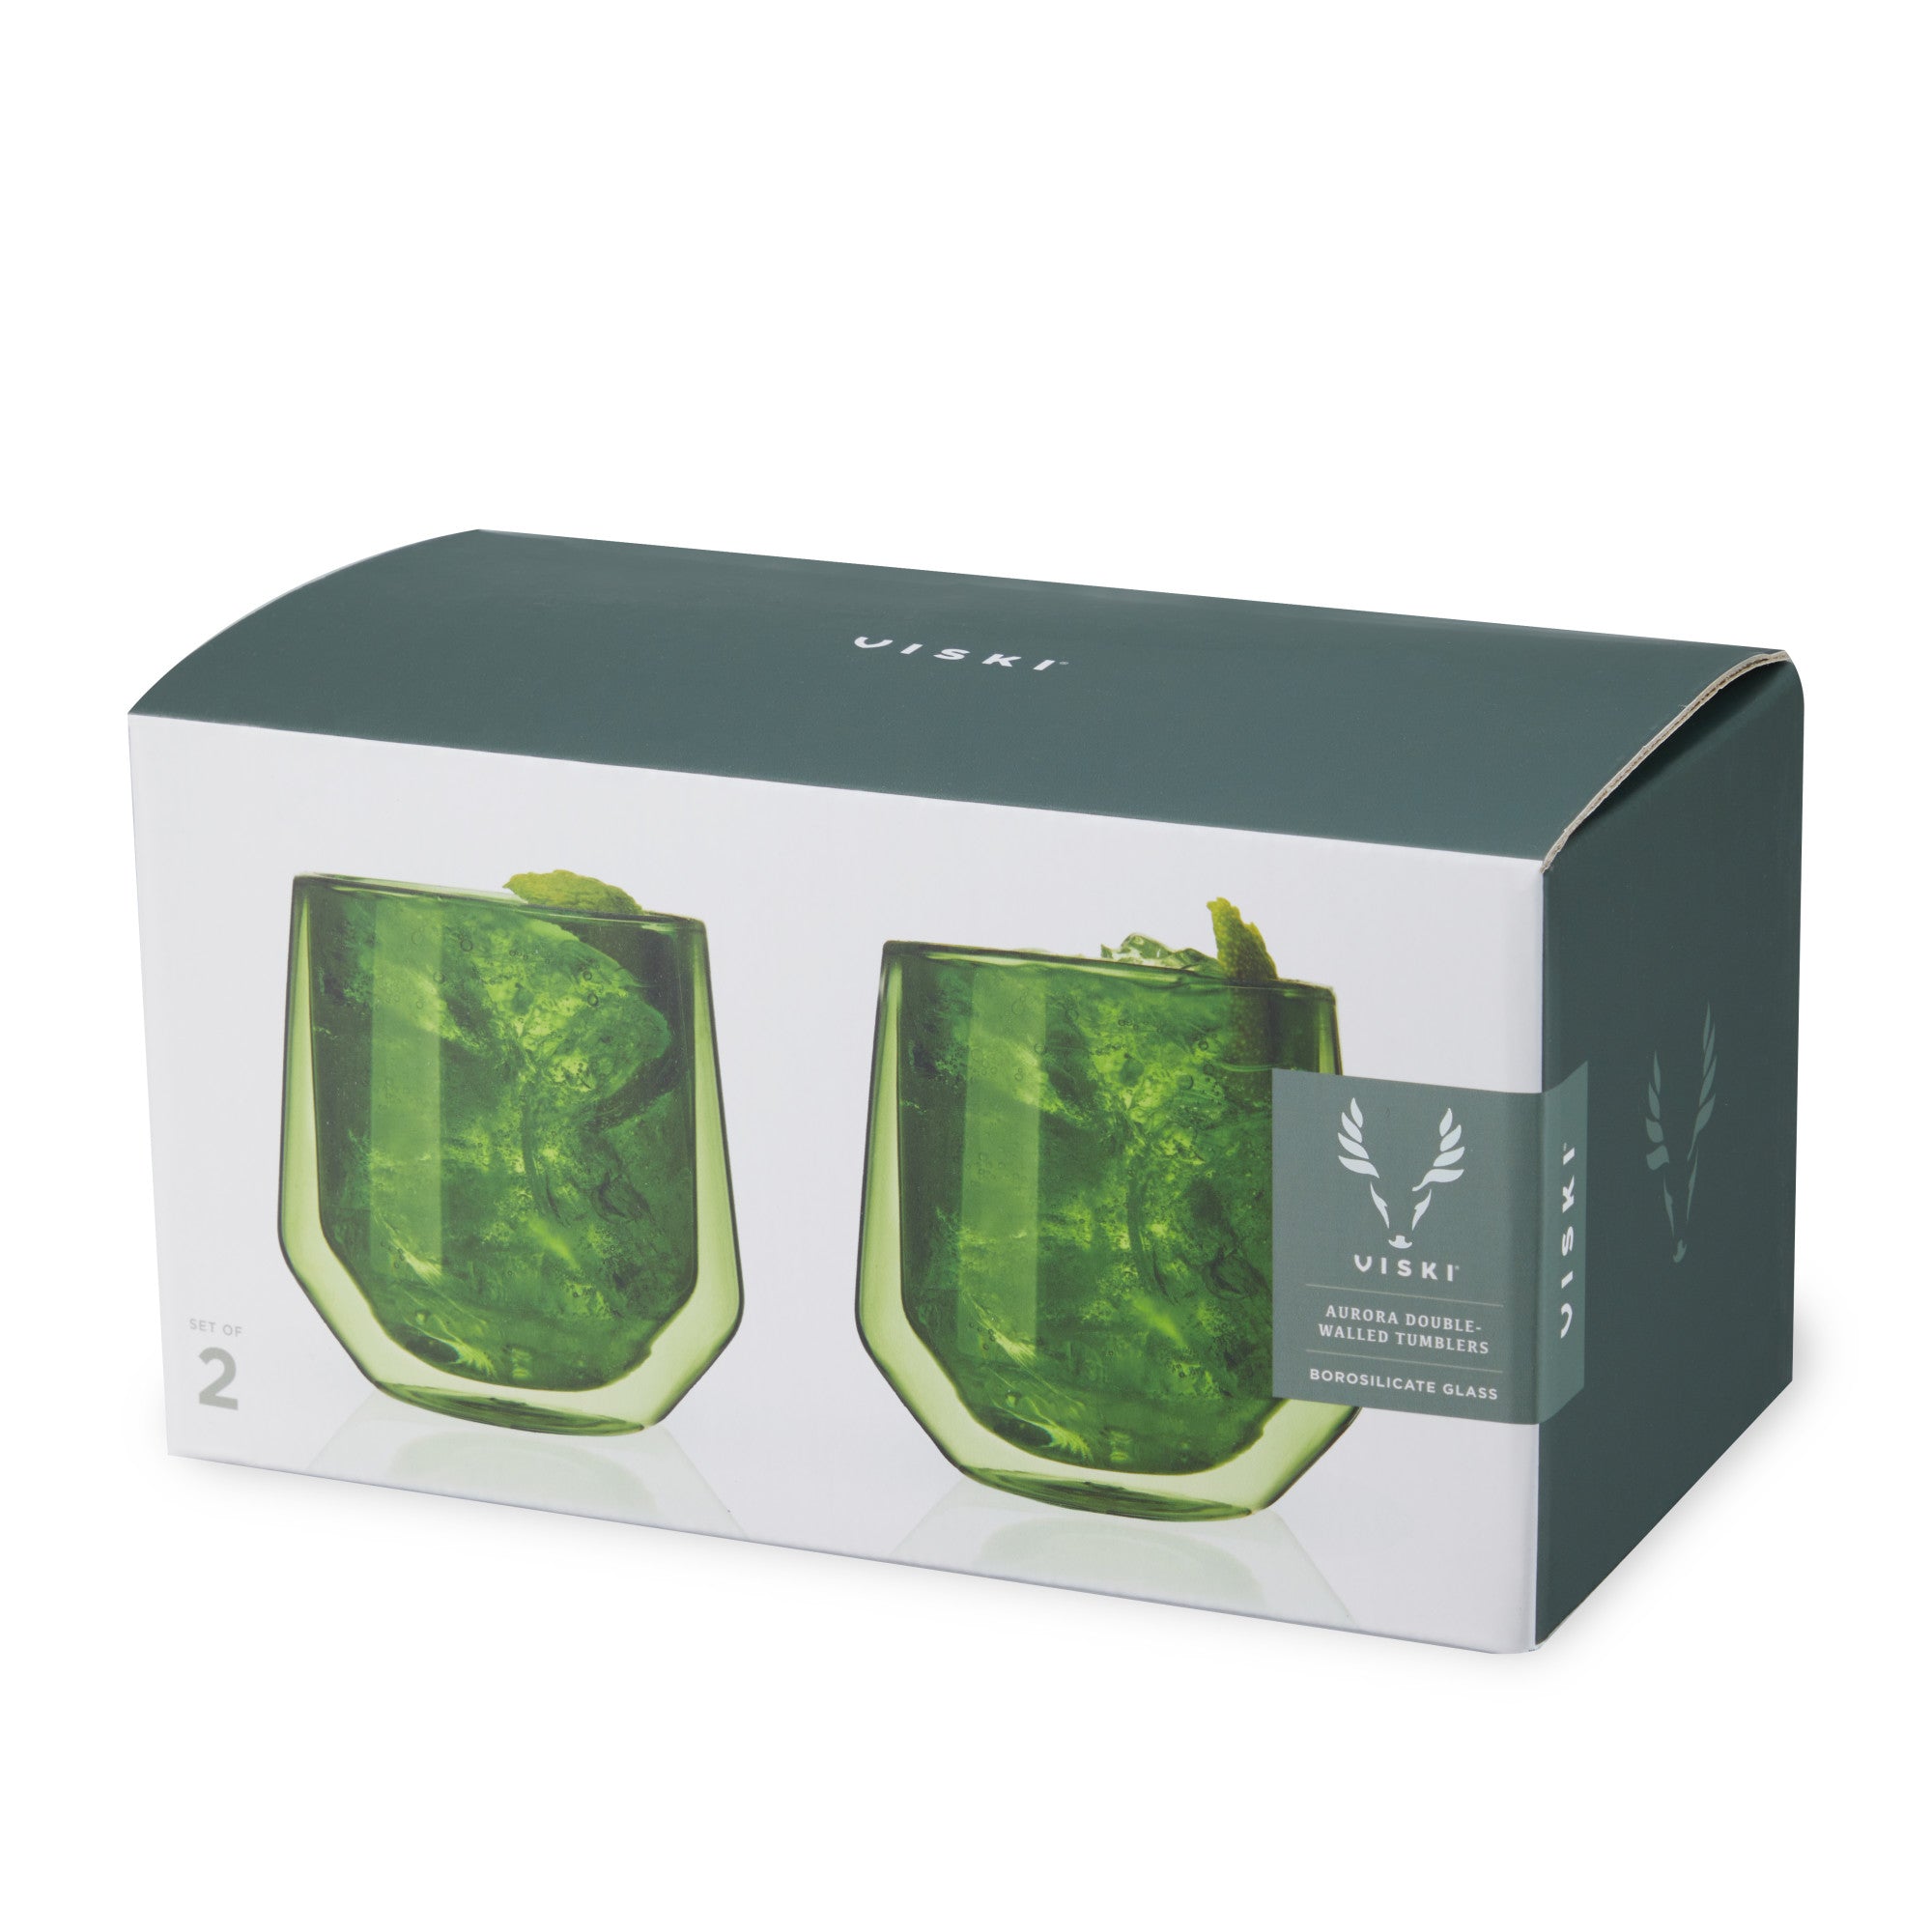 Double Walled Aurora Tumblers in Green set of 2 by Viski (11189)